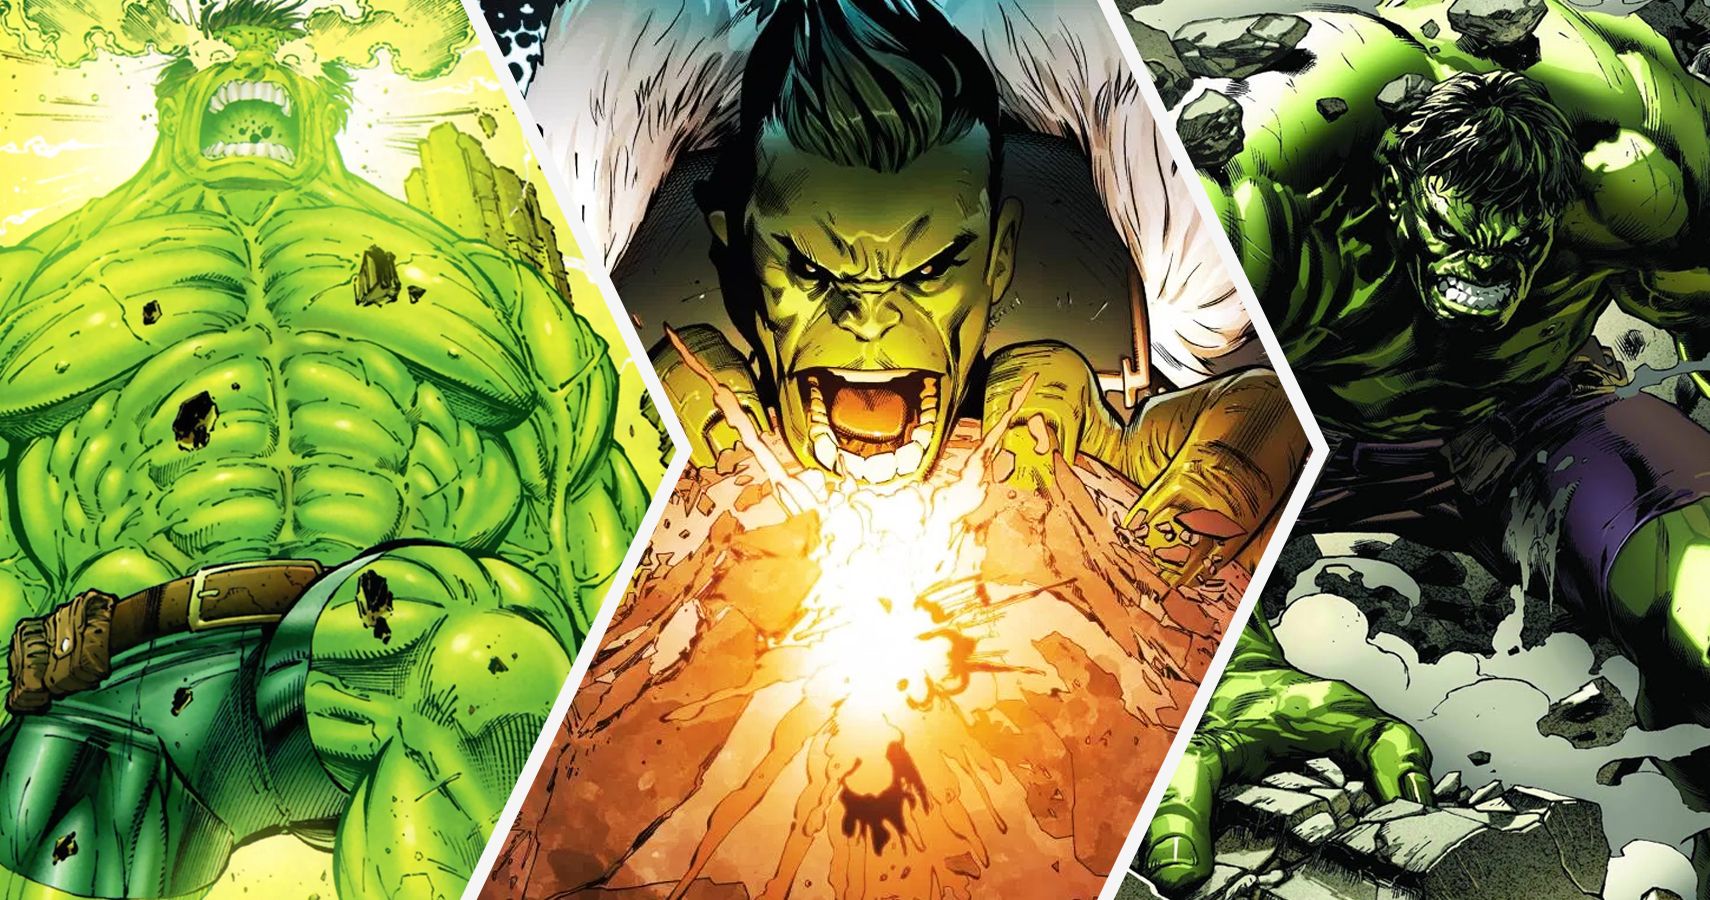 Is there a planet of hulks?